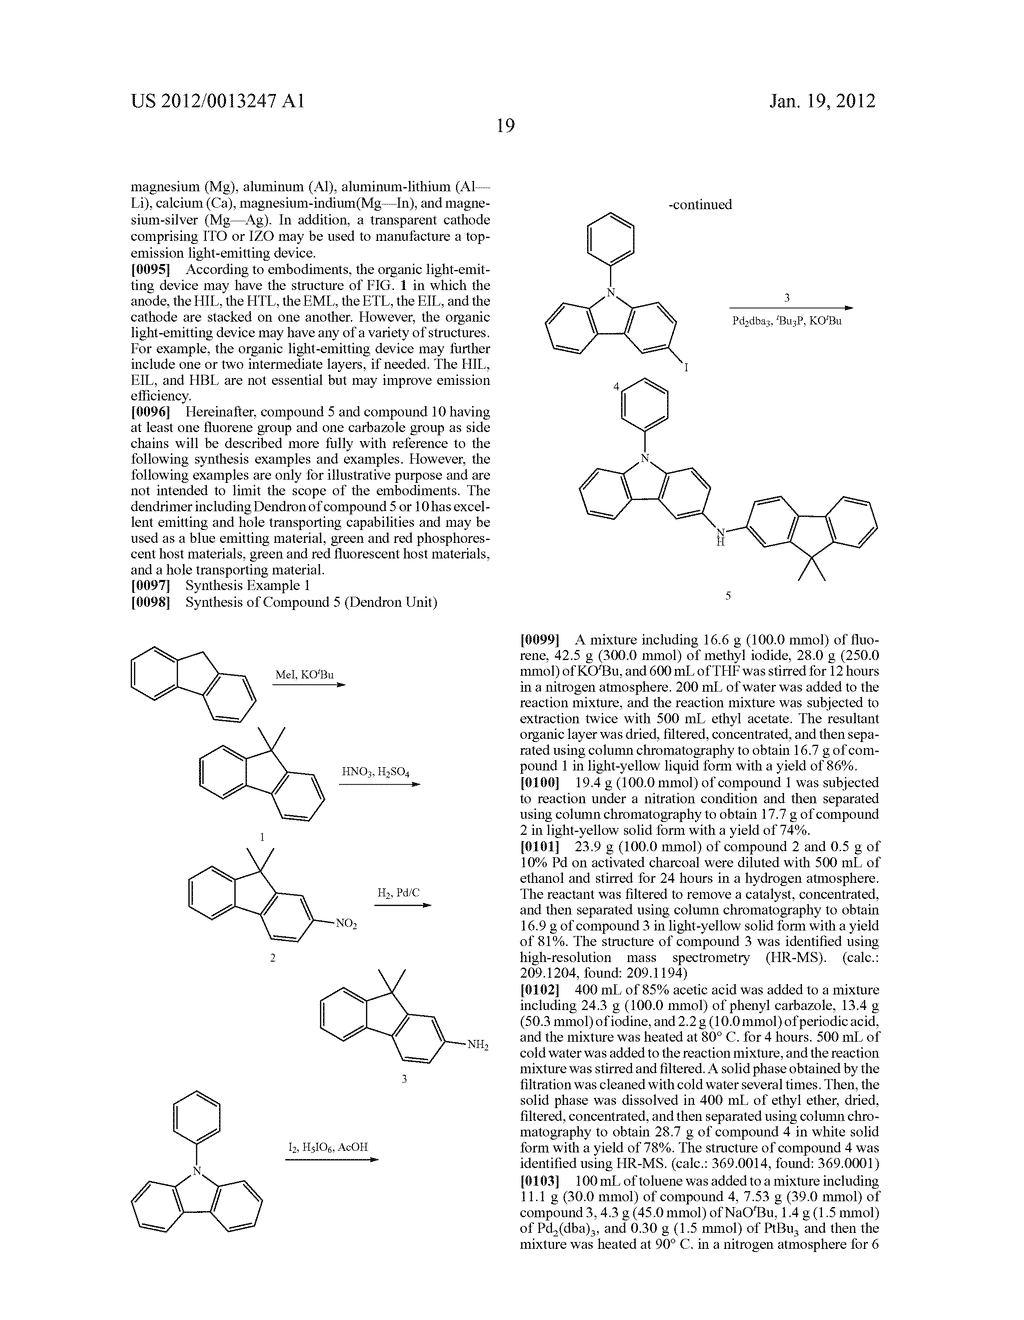 DENDRIMER AND ORGANIC LIGHT-EMITTING DEVICE USING THE SAME - diagram, schematic, and image 21